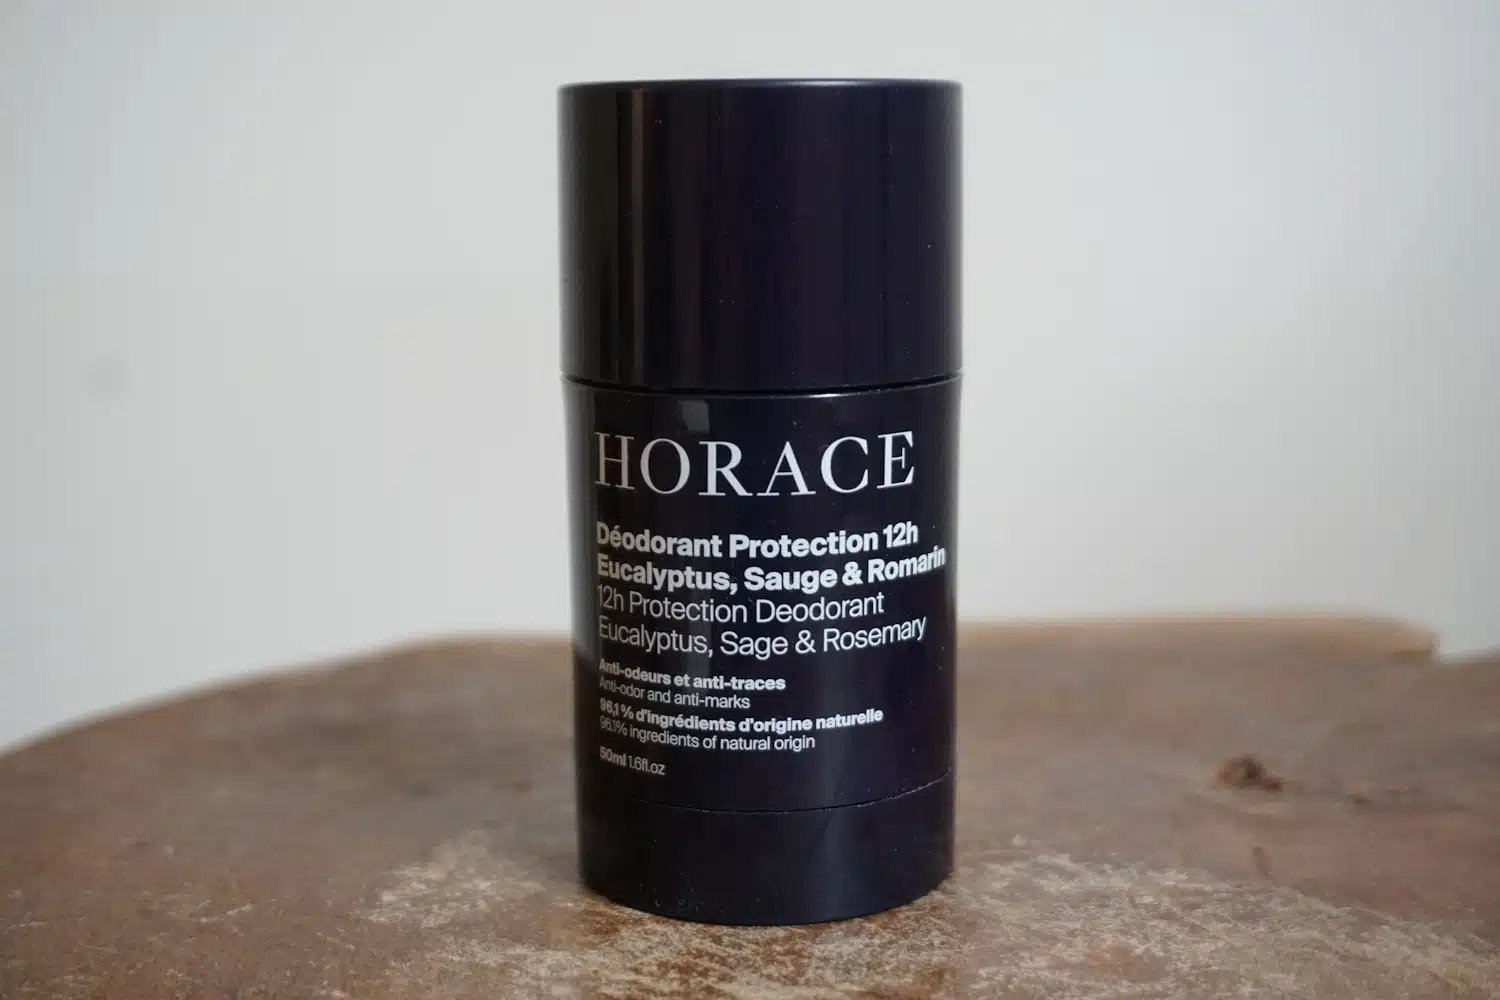 Horace 12h Protection Deodorant with Cap on